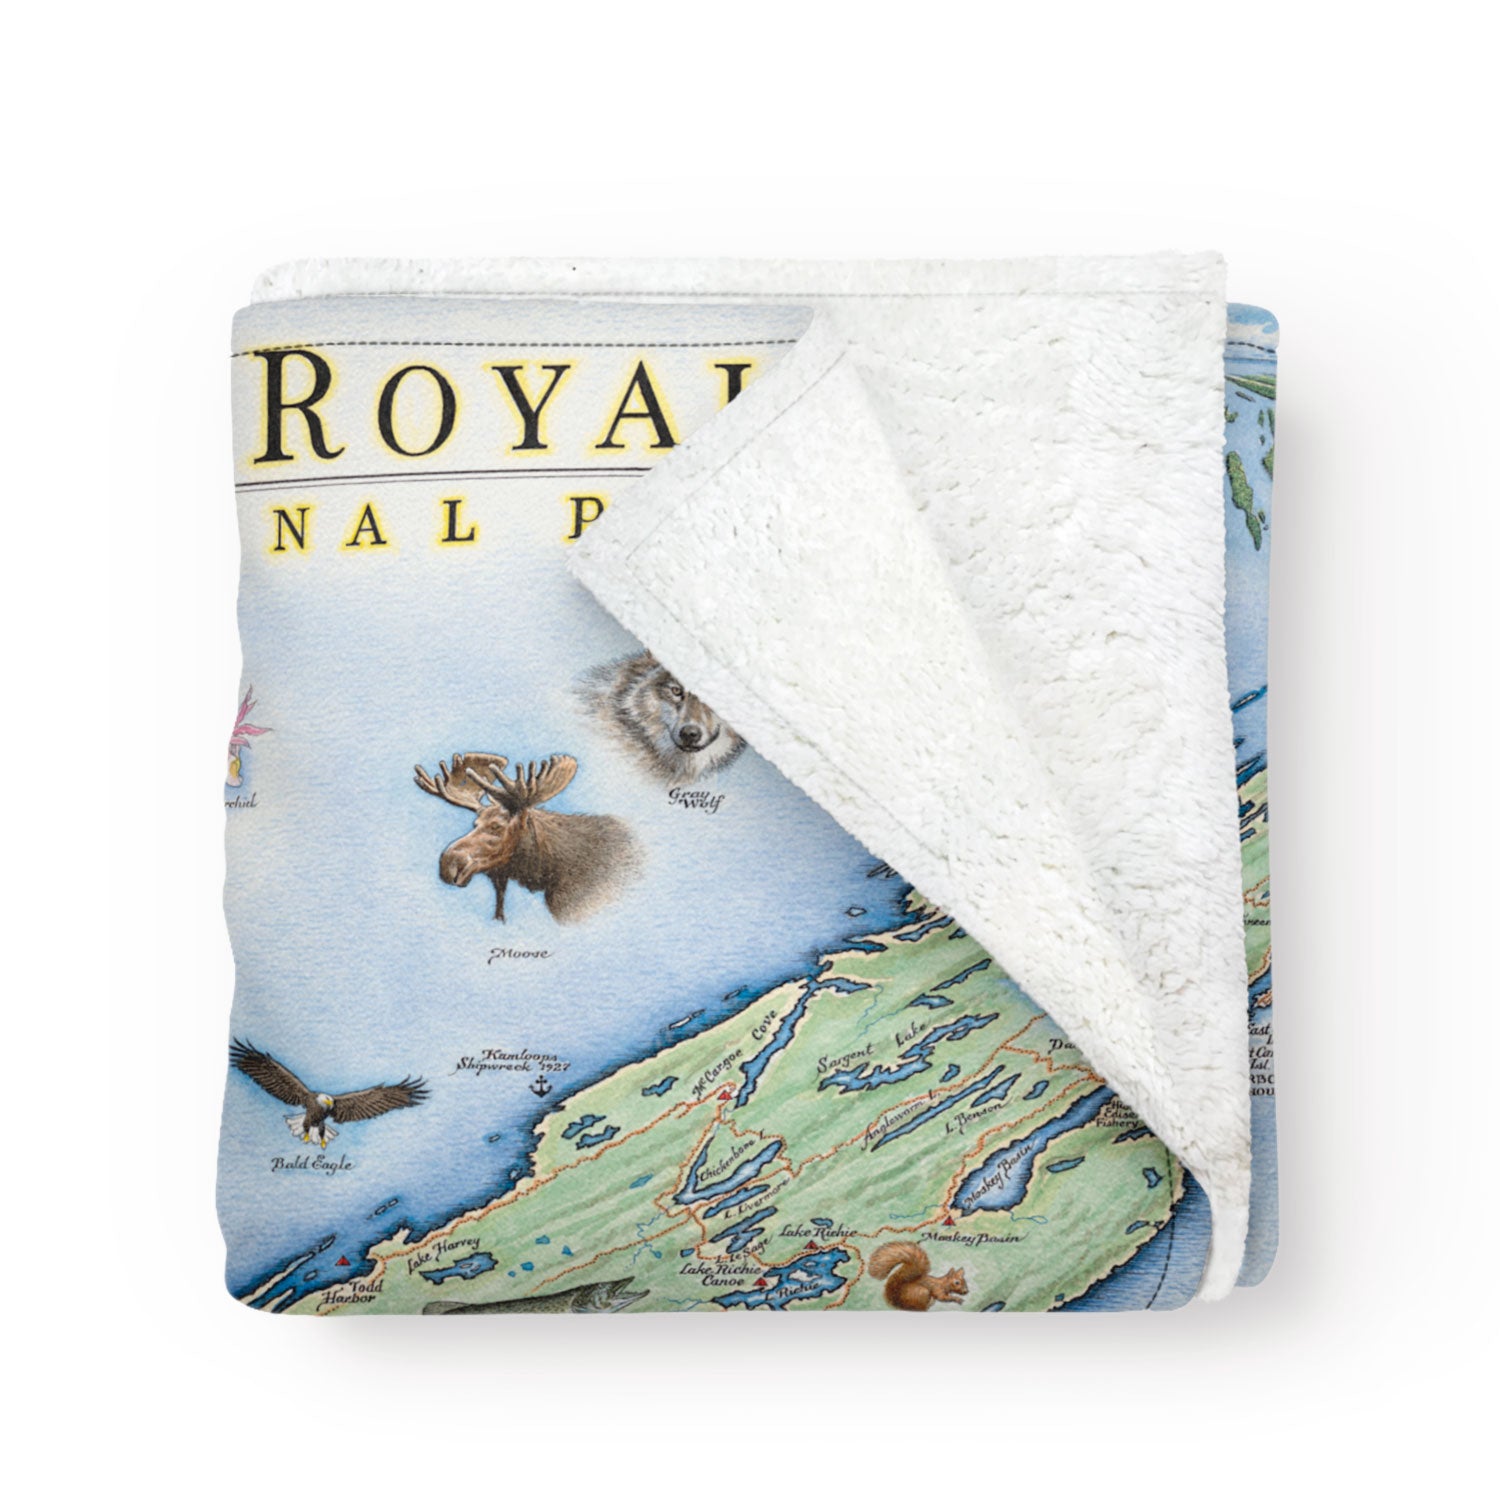 Folded blanket with a map of Isle Royale National Park in Michigan. Soft and cozy blanket. Measures 58